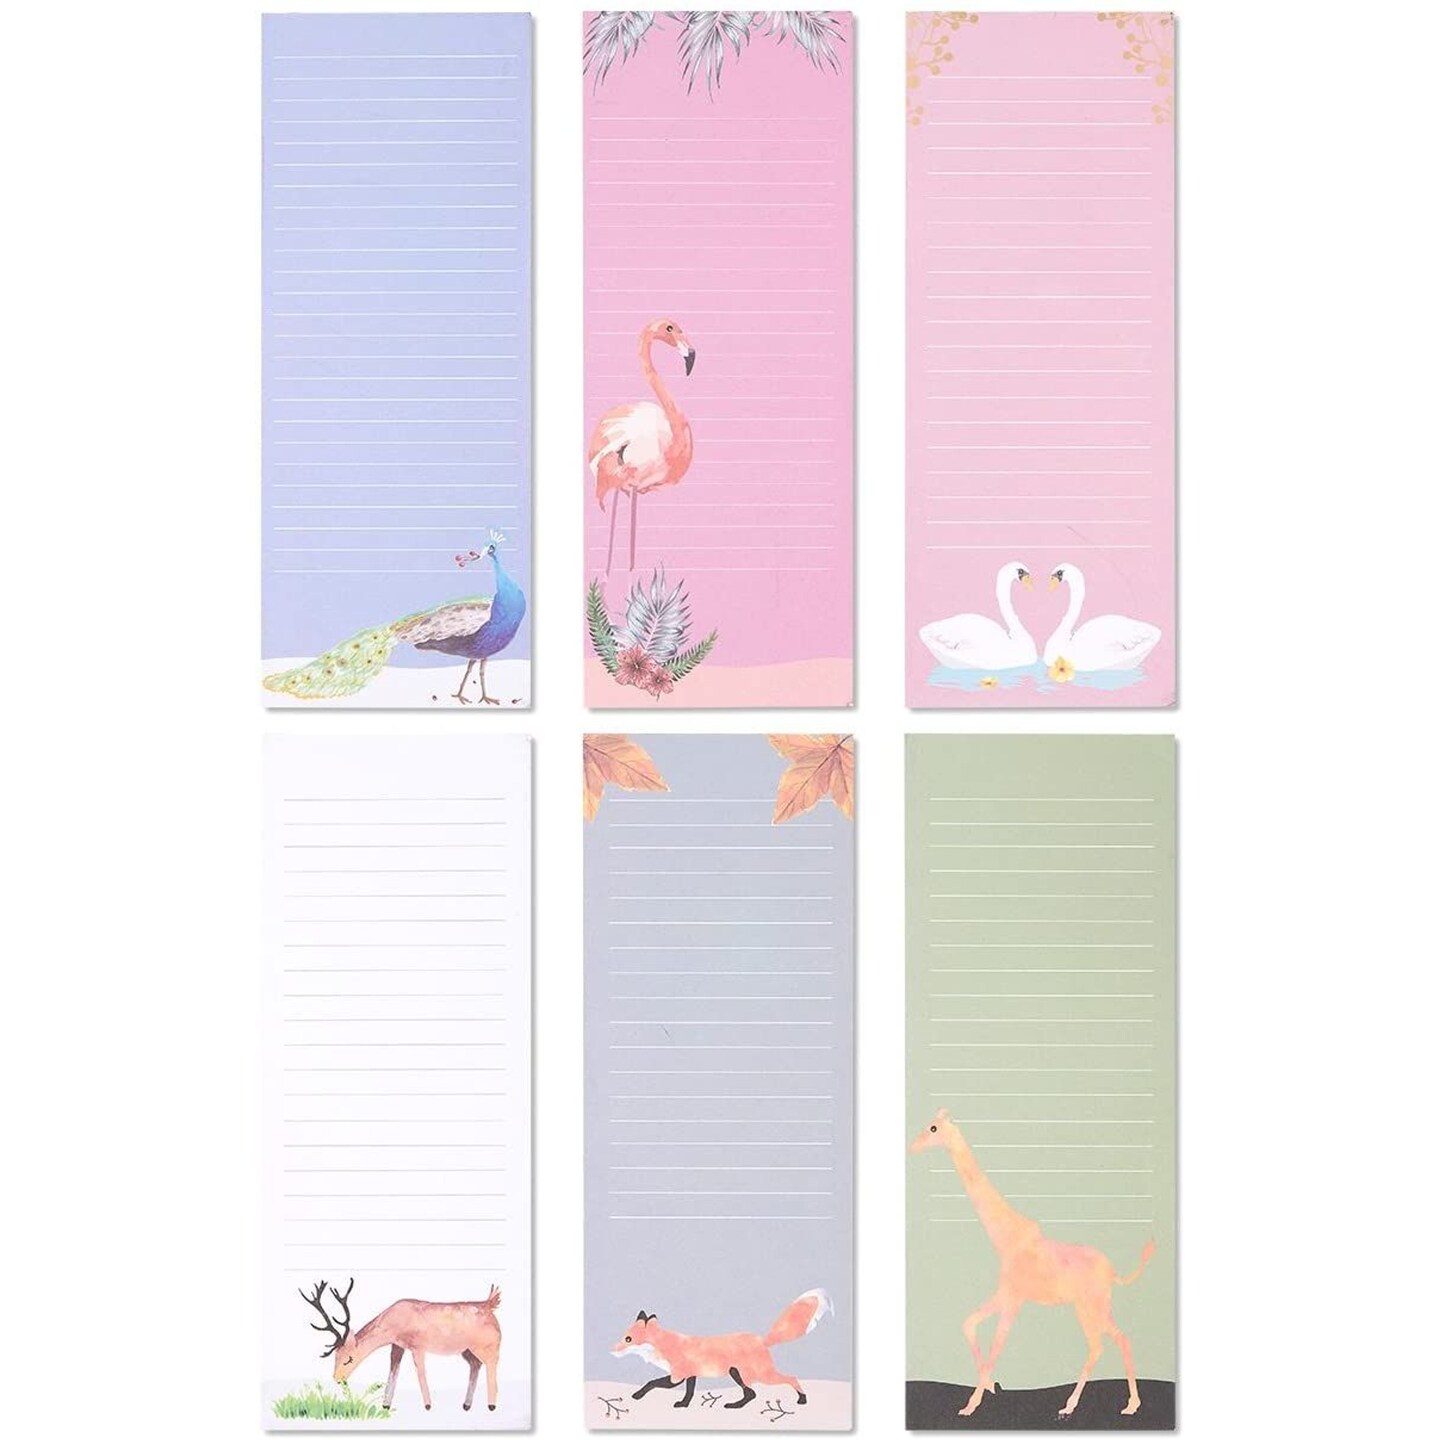 6 Pack Magnetic Notepads for Refrigerator Grocery Shopping List, Notes, To-Do Memos, Animal Notepads (3.5 x 9 In)